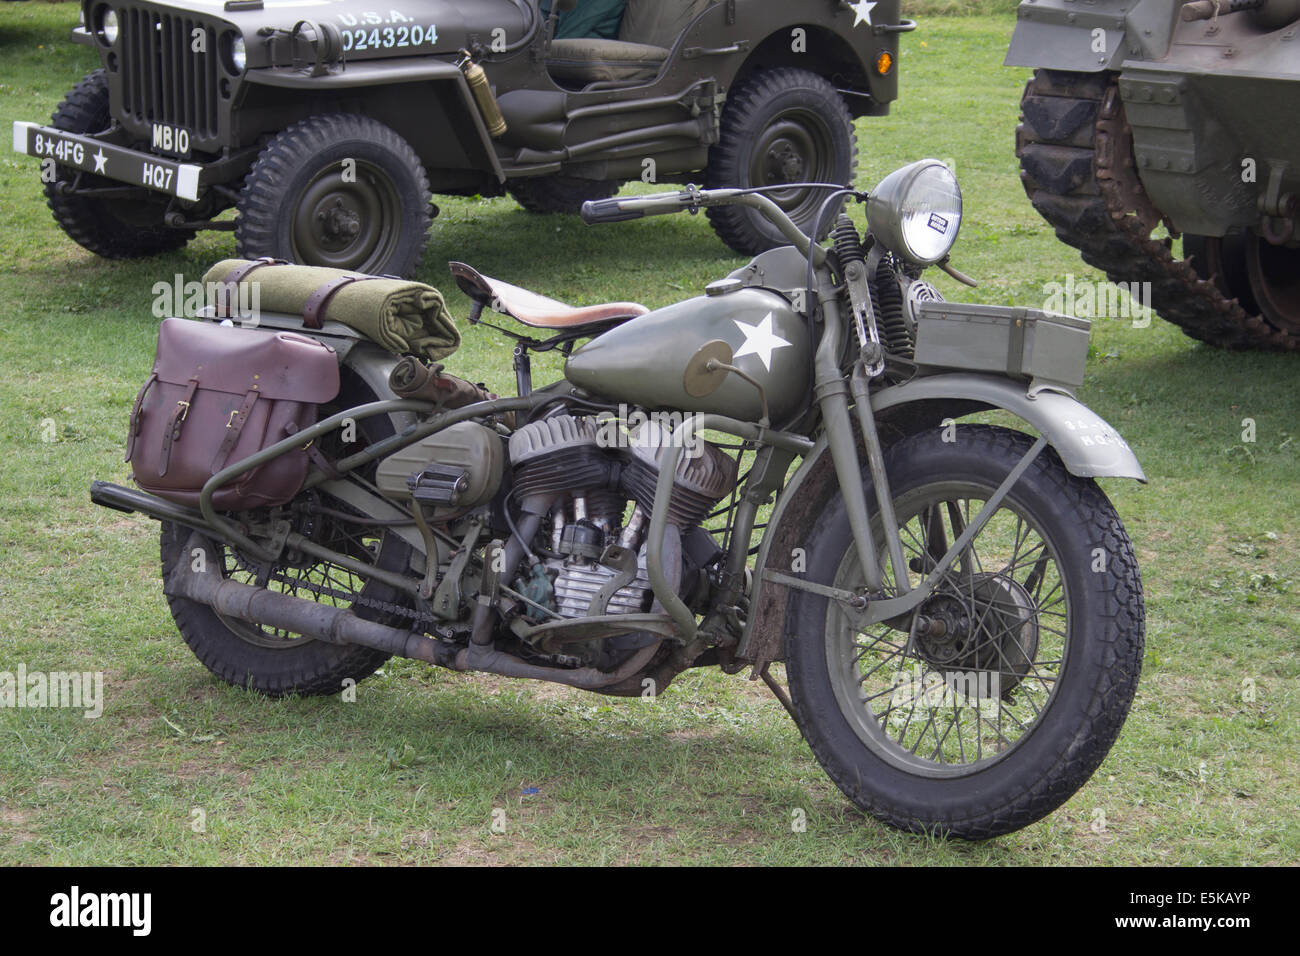 Classic army motorcycle Stock Photo